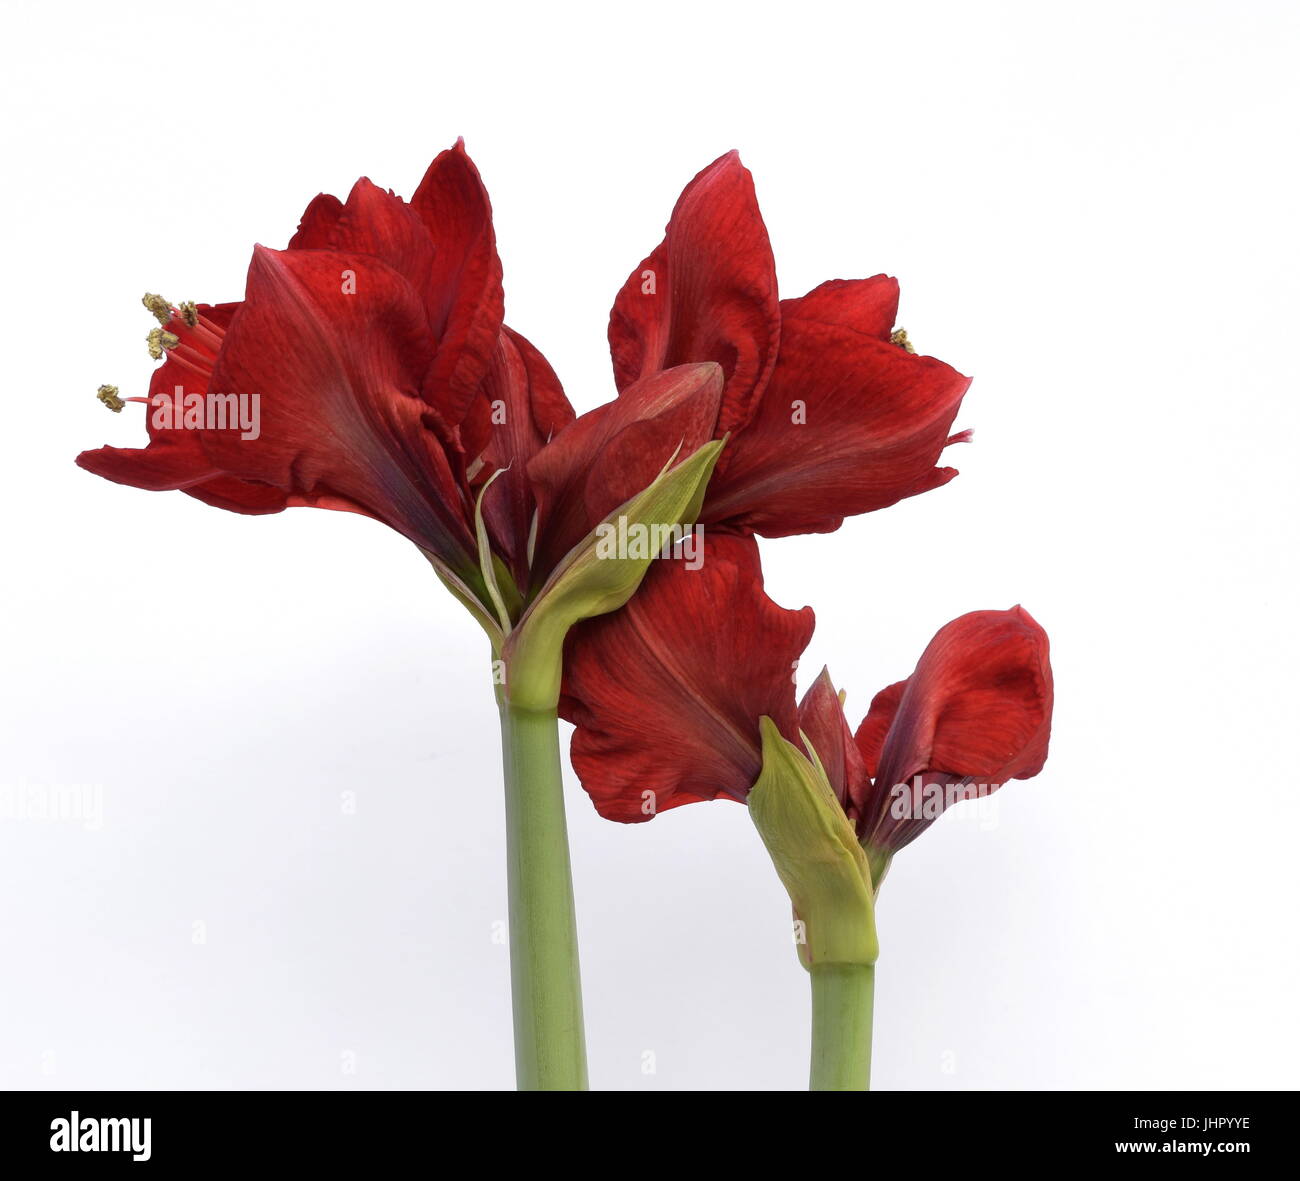 Red Amaryllis flower buds with stems against white background Stock Photo